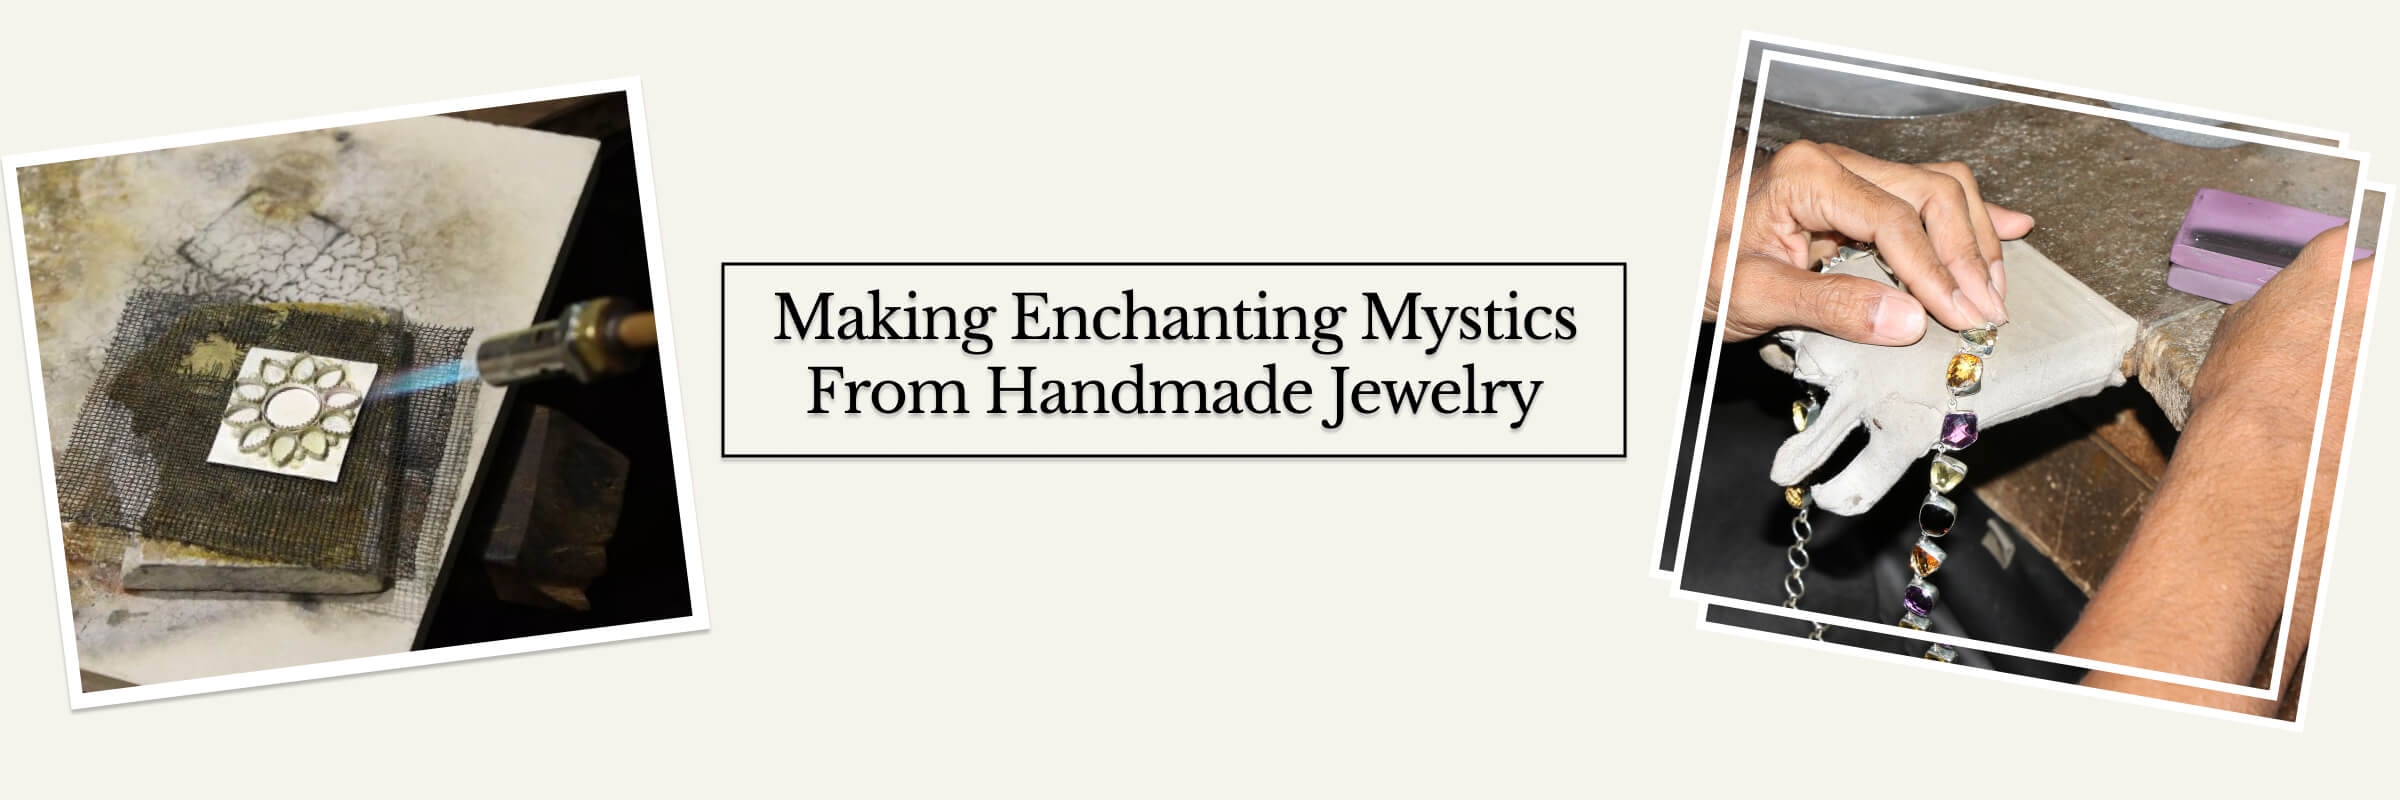 Crafting Timeless Beauty With Love - Handmade Jewelry